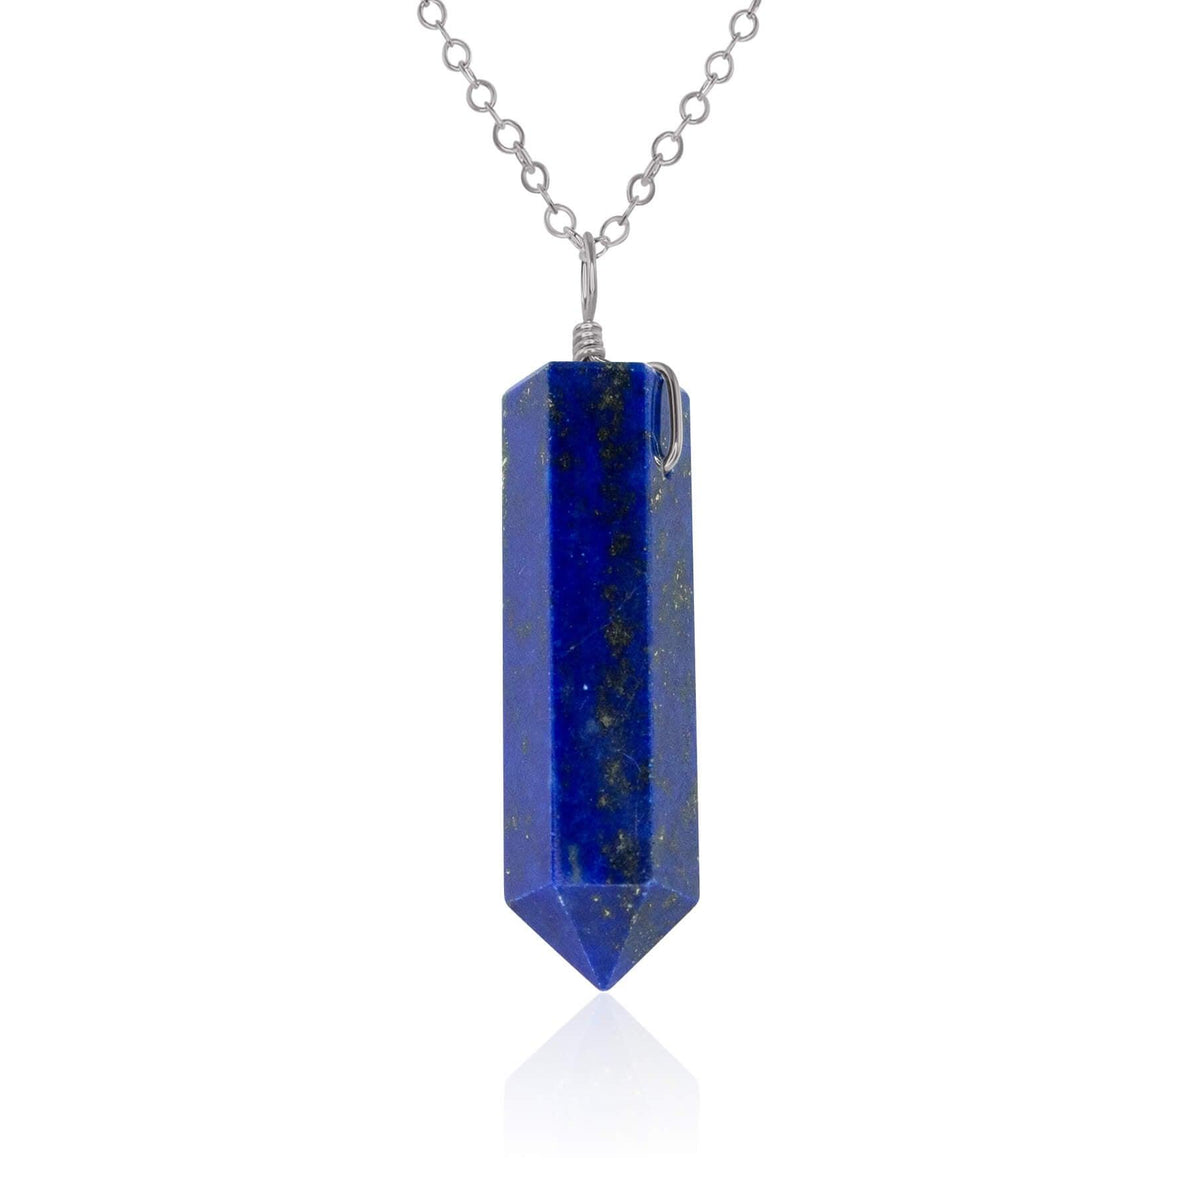 Large Crystal Point Necklace - Lapis Lazuli - Stainless Steel - Luna Tide Handmade Jewellery